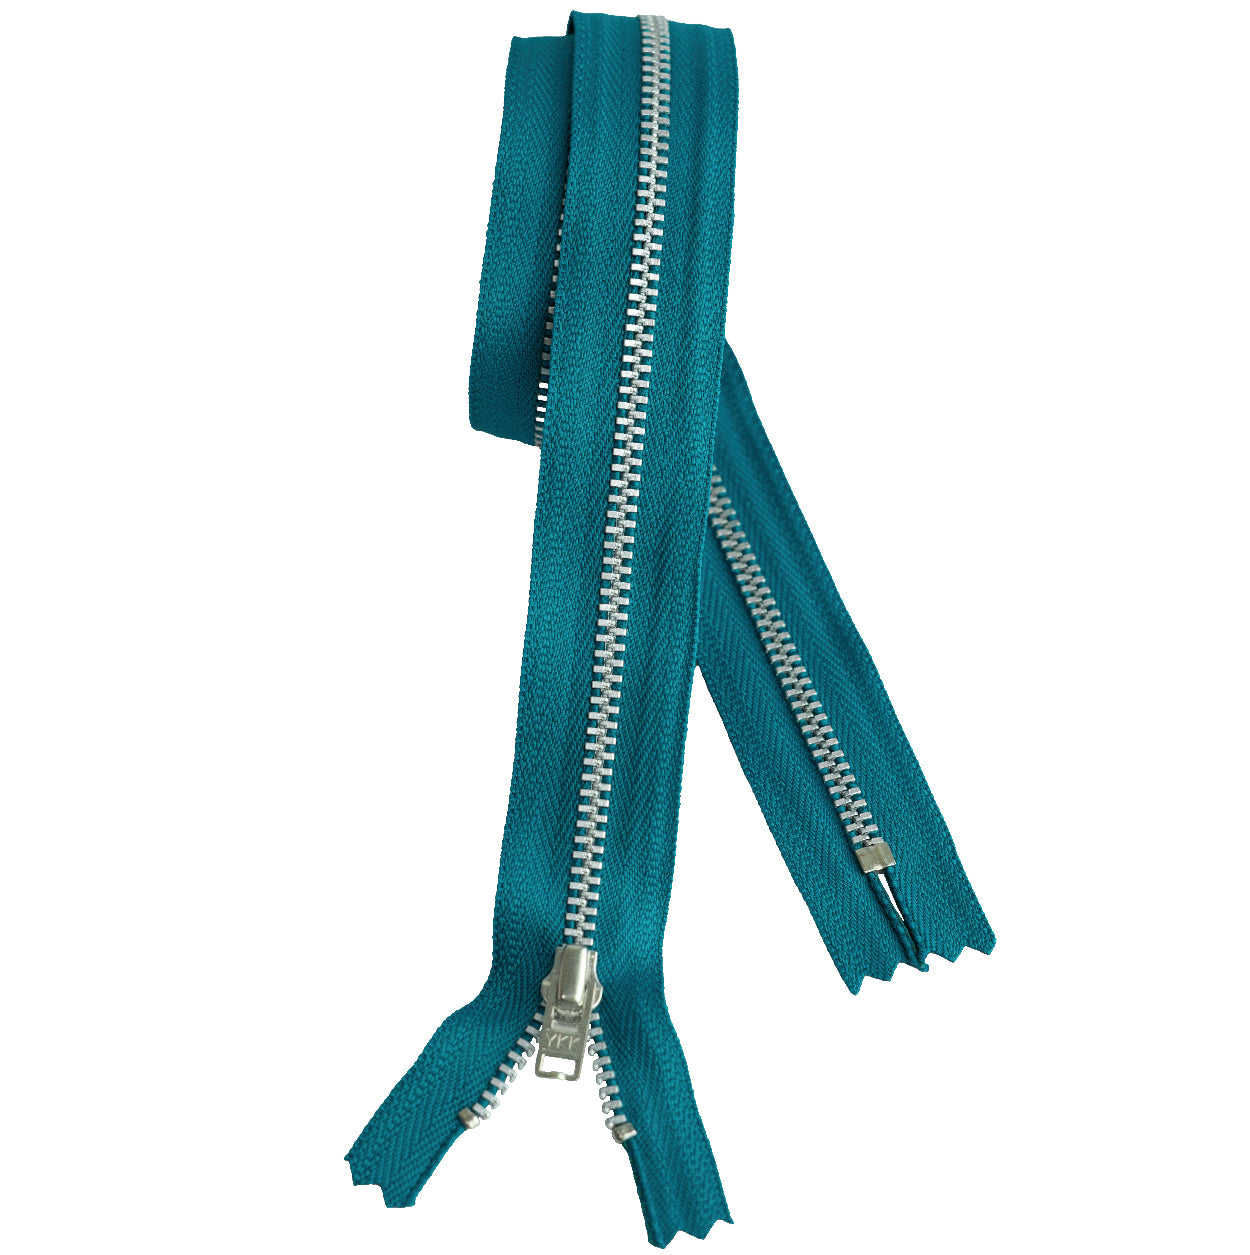 YKK silver tooth Metal Dress Zips - Jade from Jaycotts Sewing Supplies